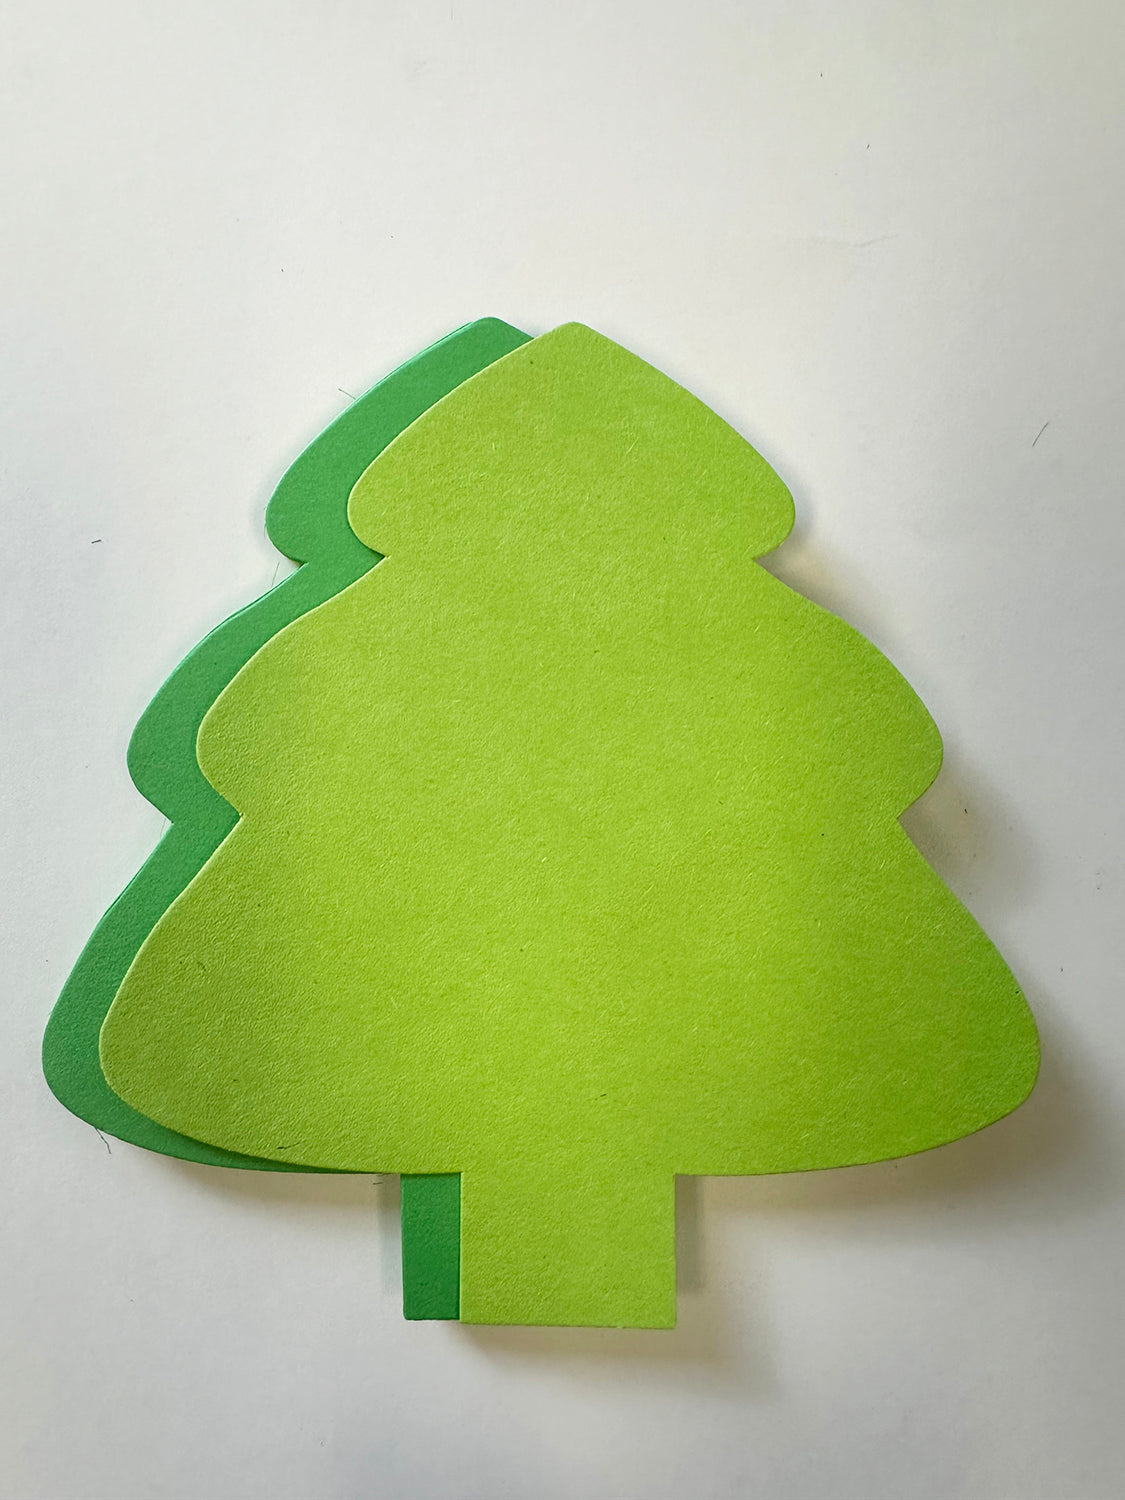 15ct Creative Shapes etc. Small Assorted Color Creative Foam Craft Cut-Outs Assorted Green Evergreen Tree